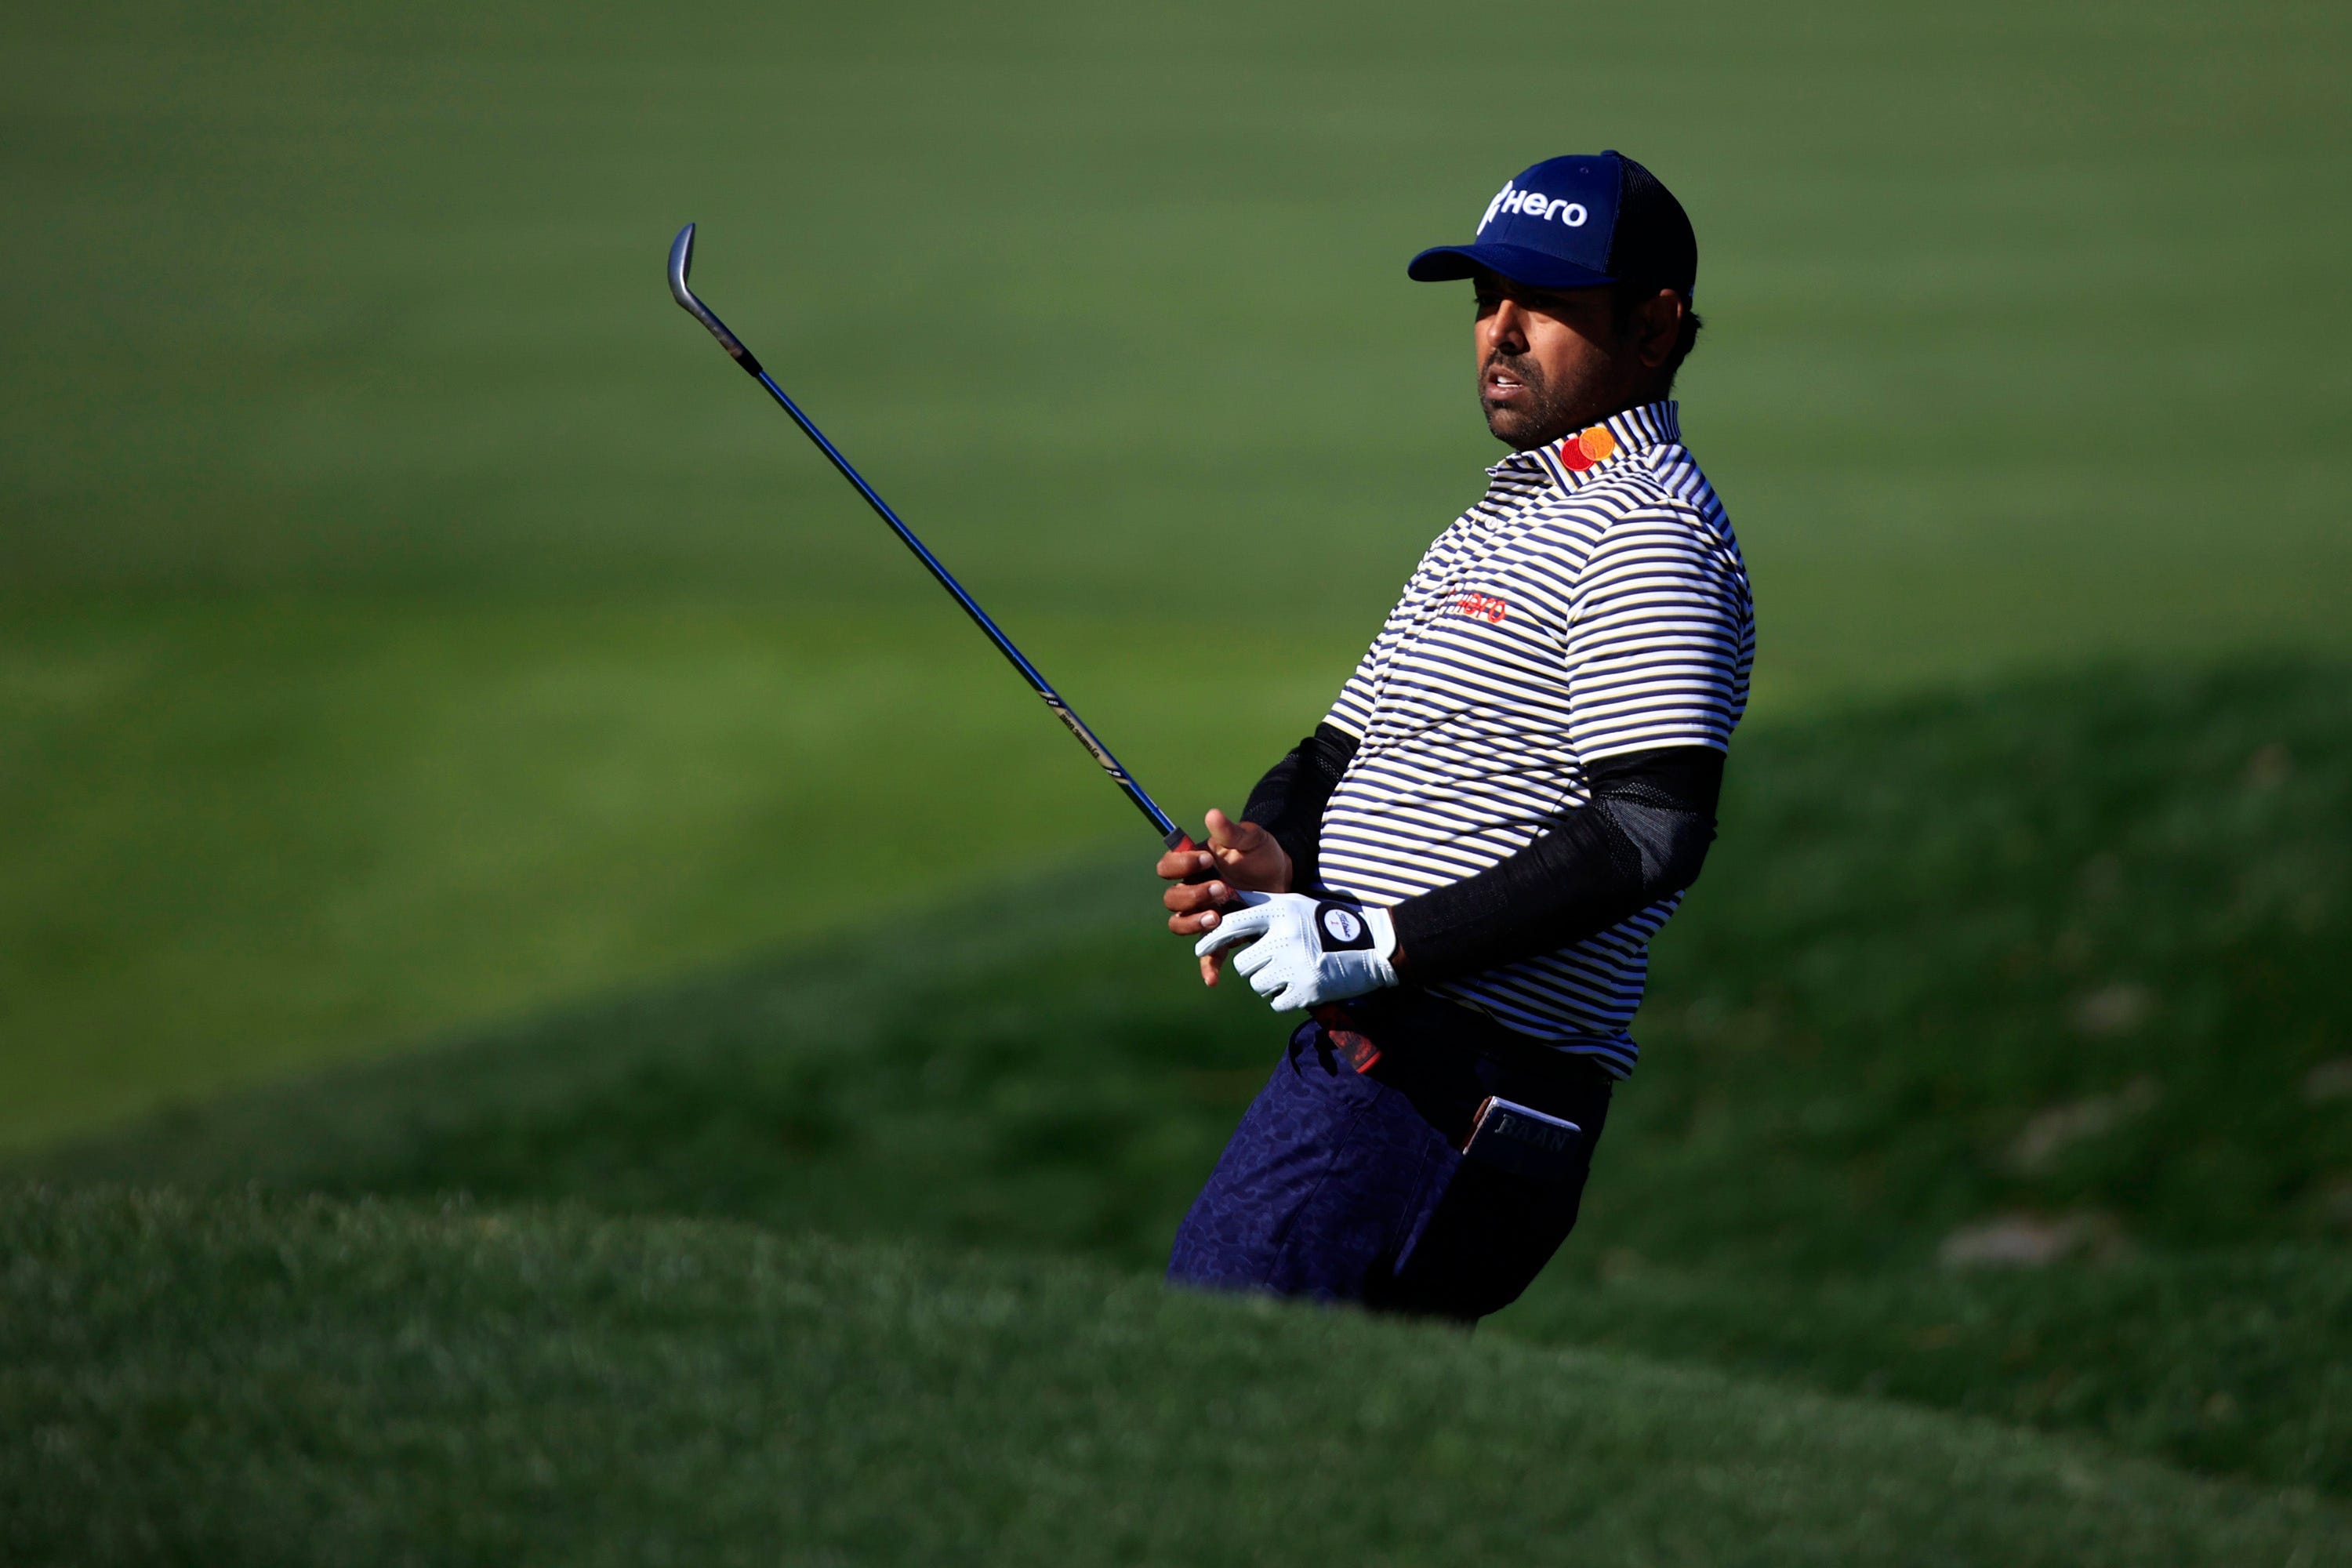 Anirban Lahiri biggest surprise in contention at The Players Championship